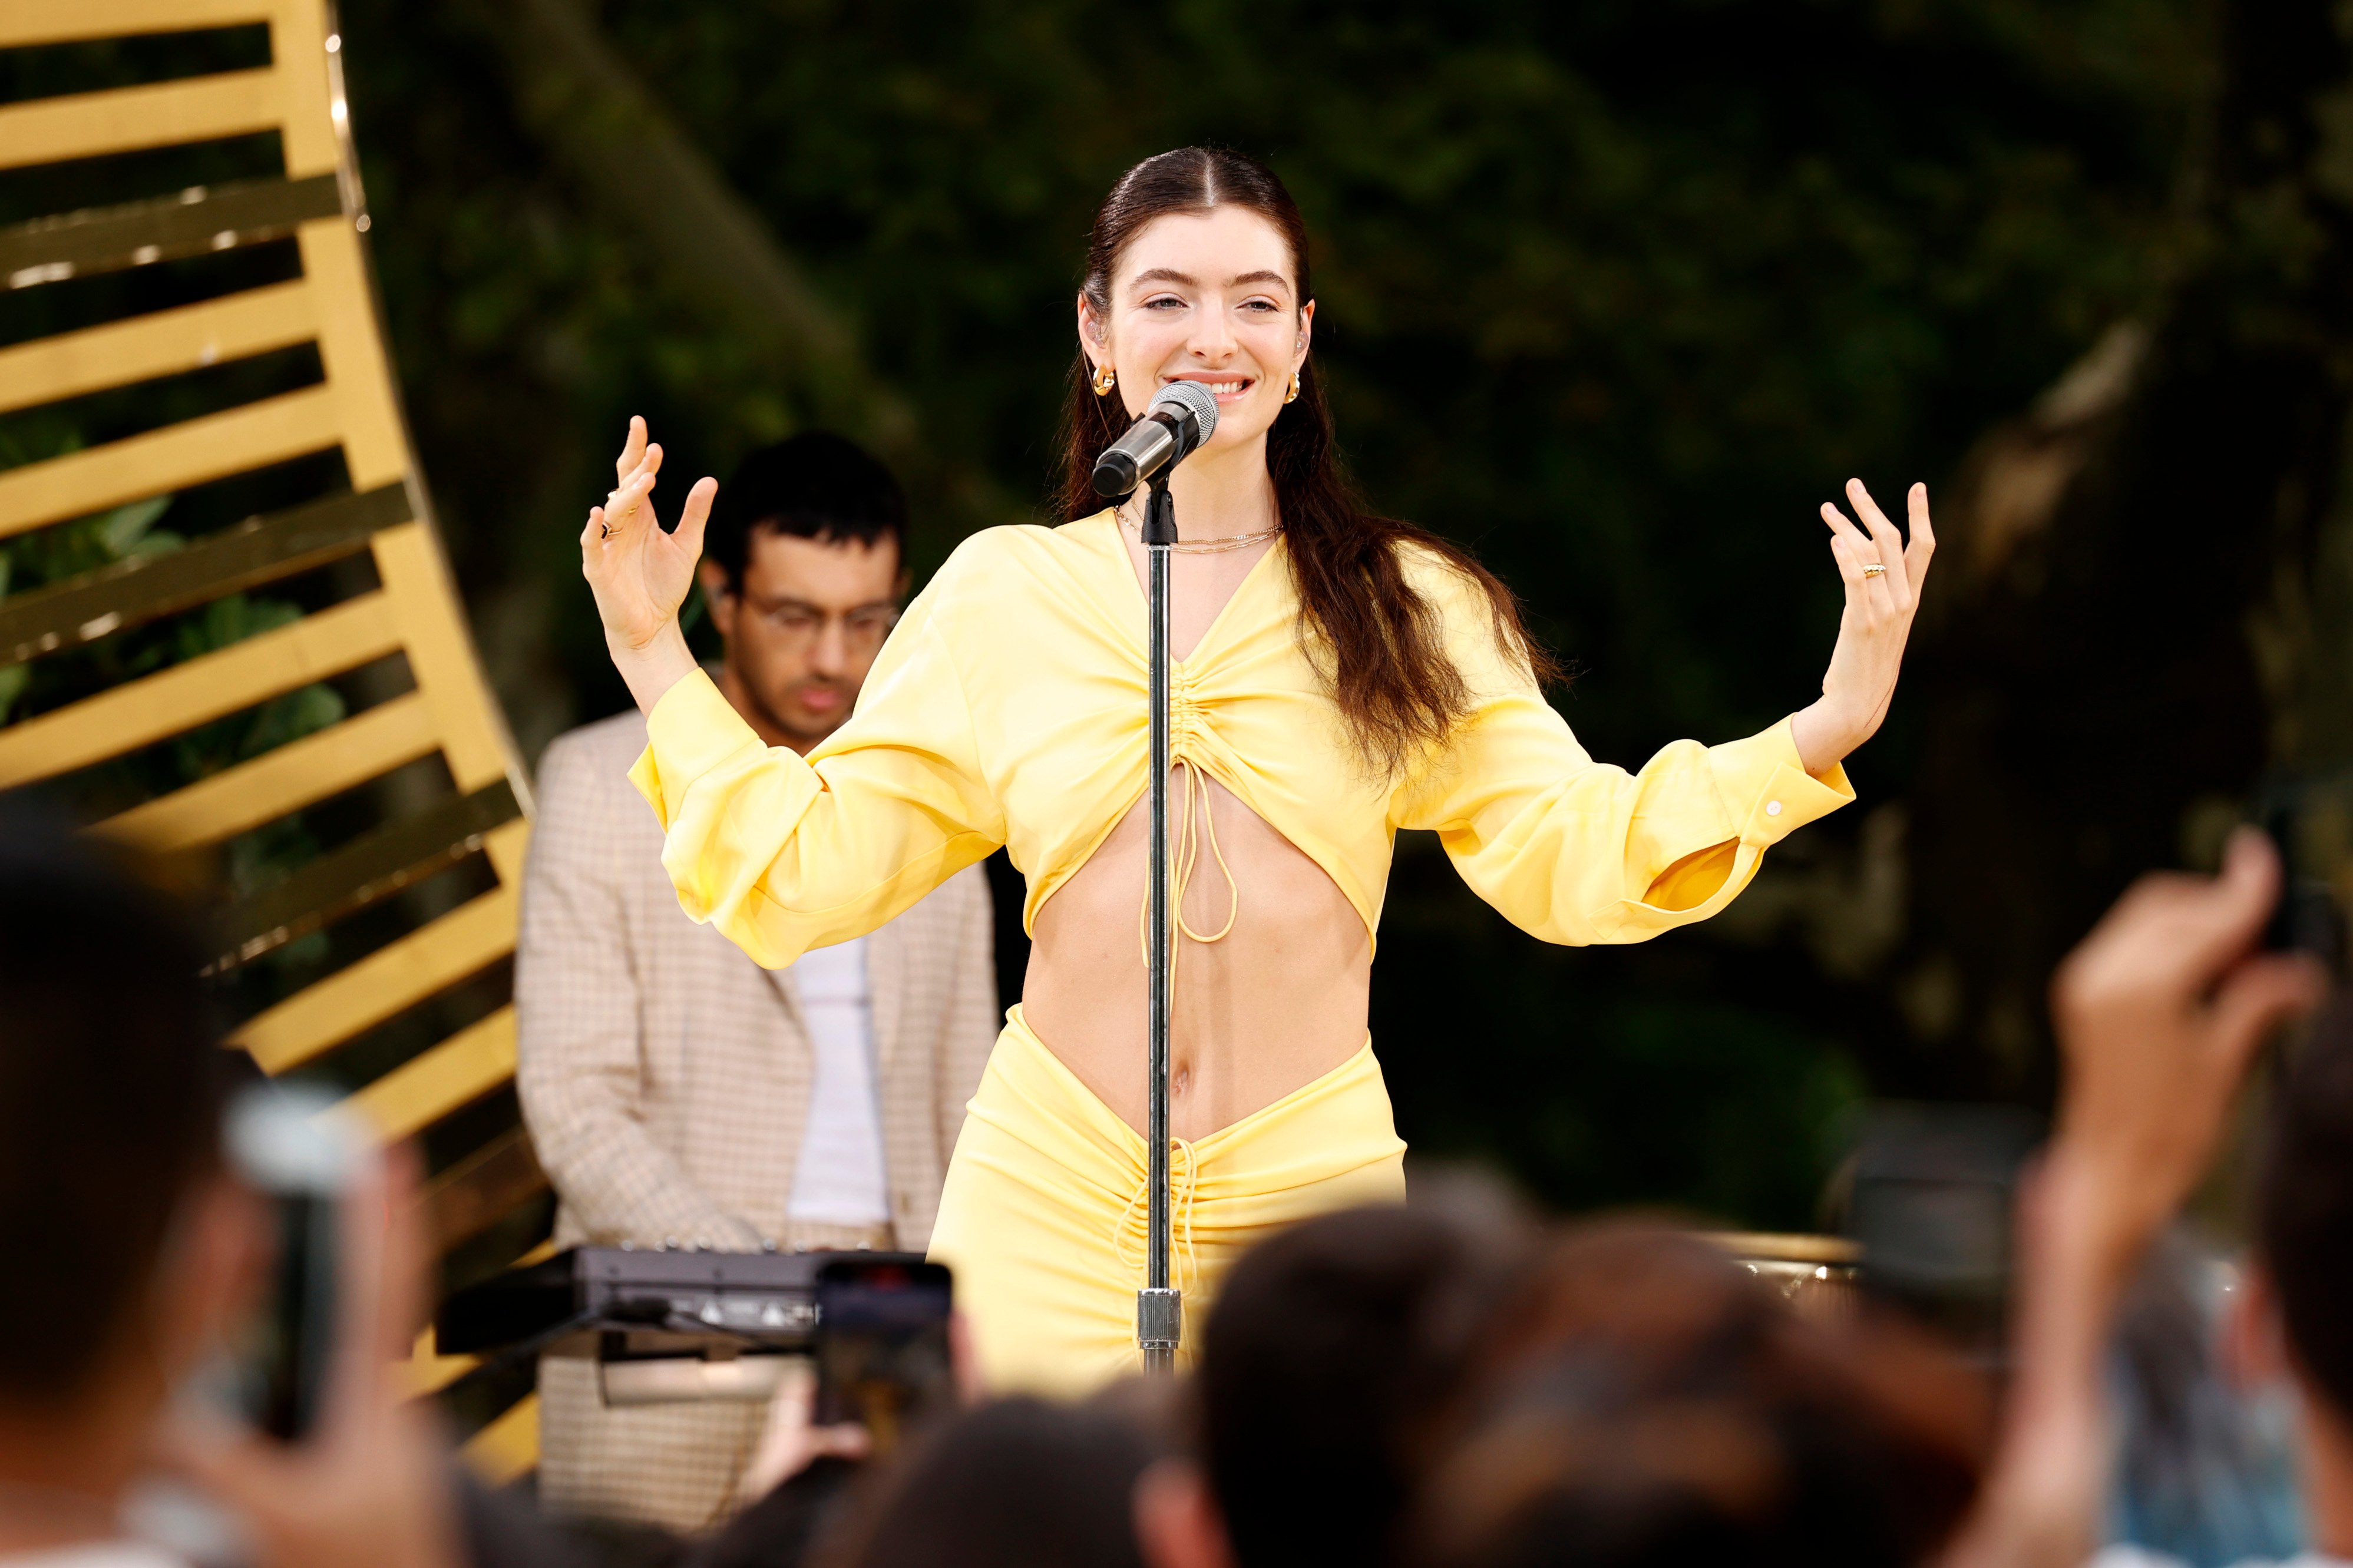 Lorde performing on stage in a yellow shirt and skirt.